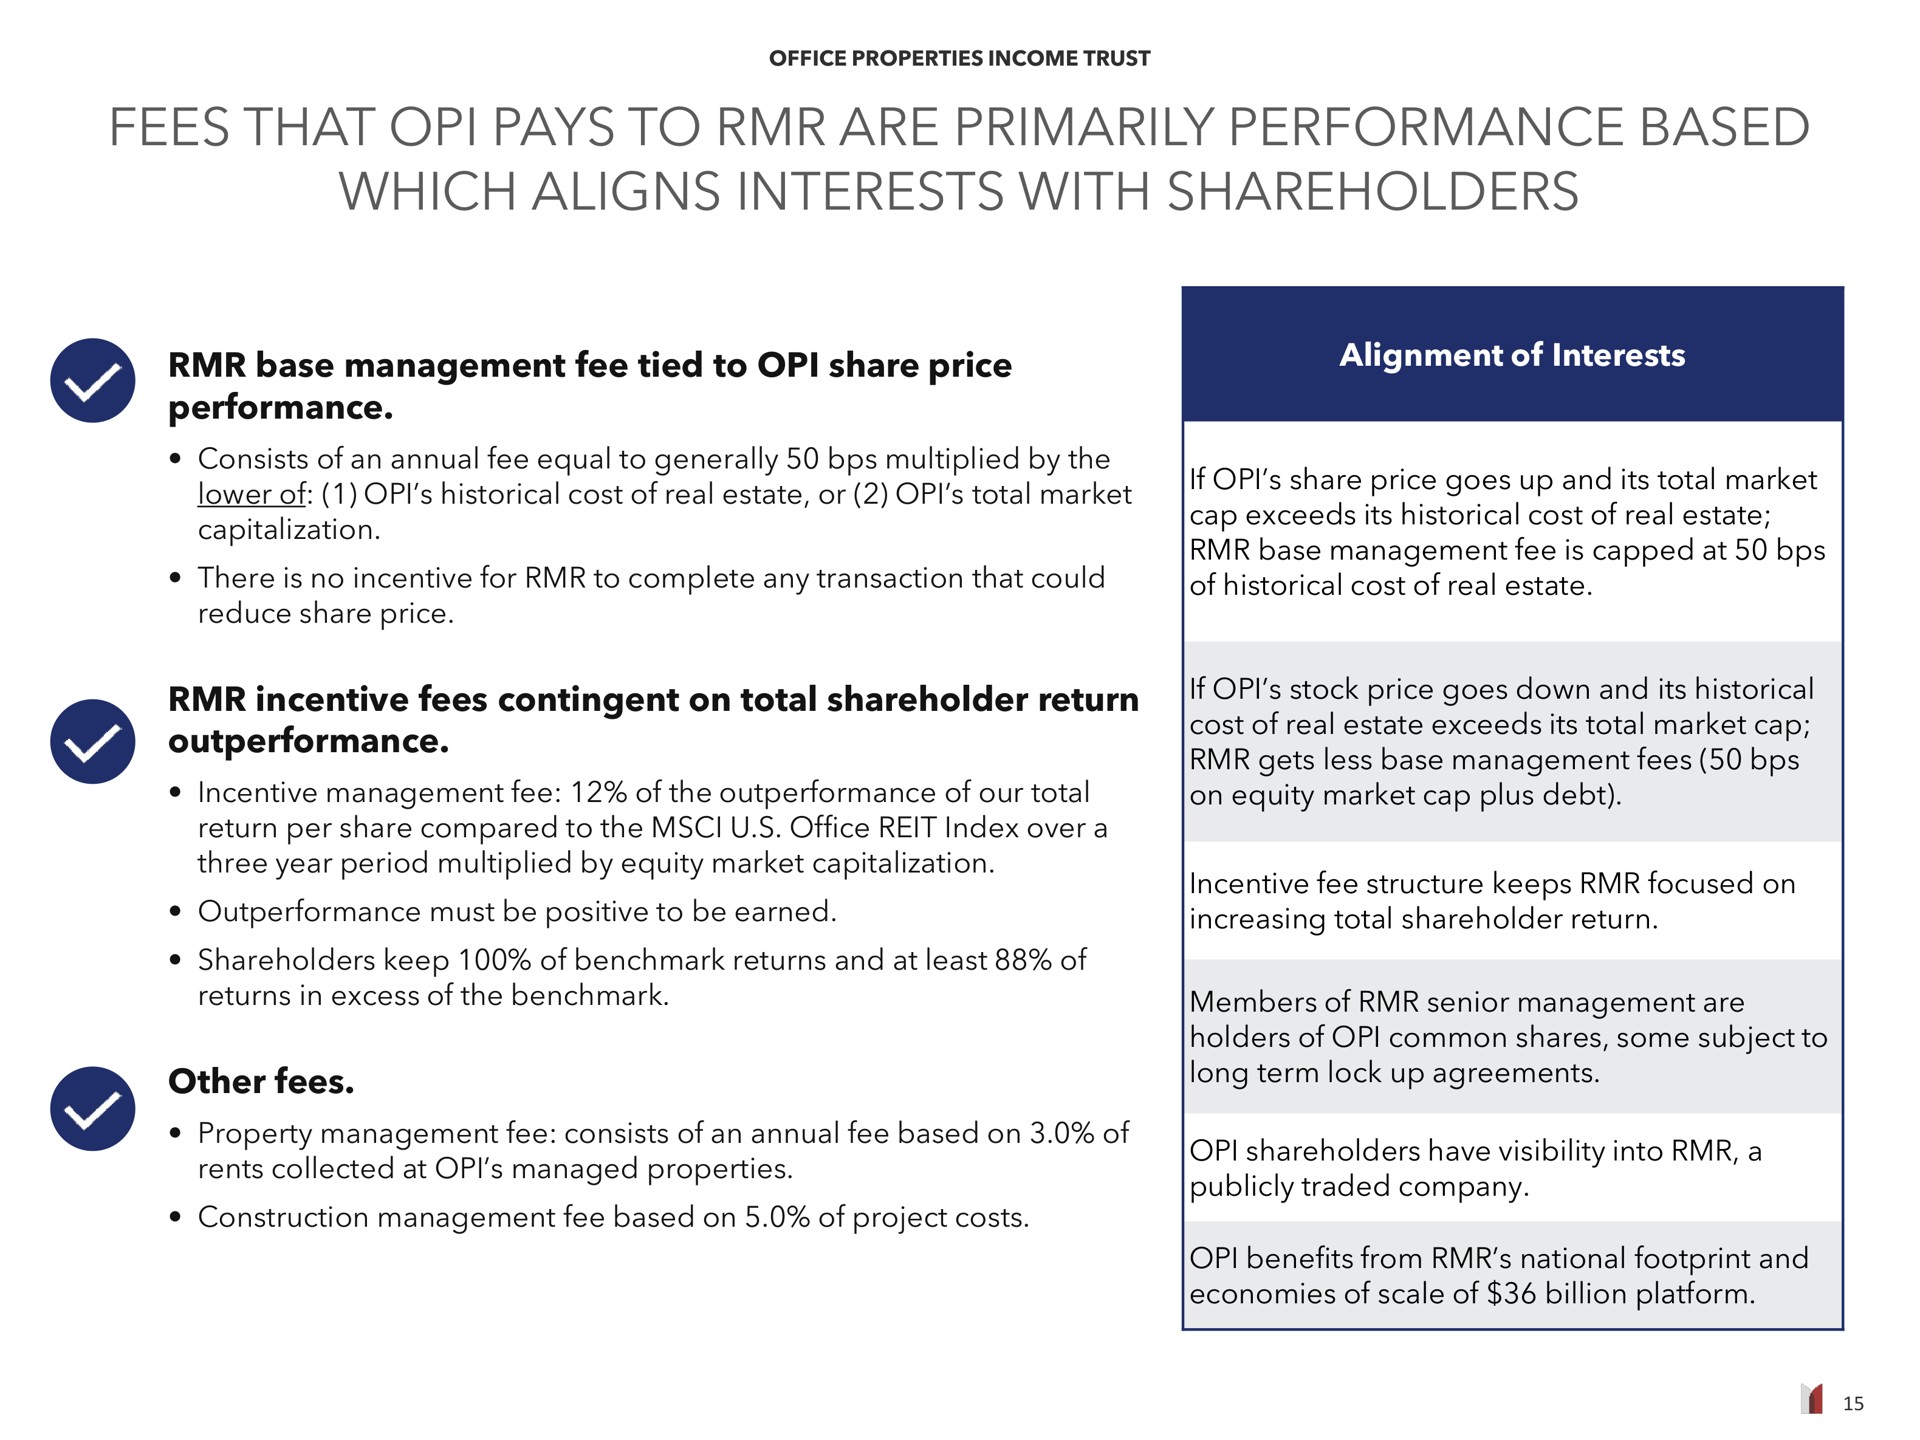 fees that pays to are primarily performance based which aligns interests with shareholders base management fee tied to share price performance incentive fees contingent on total shareholder return other fees alignment of | Office Properties Income Trust